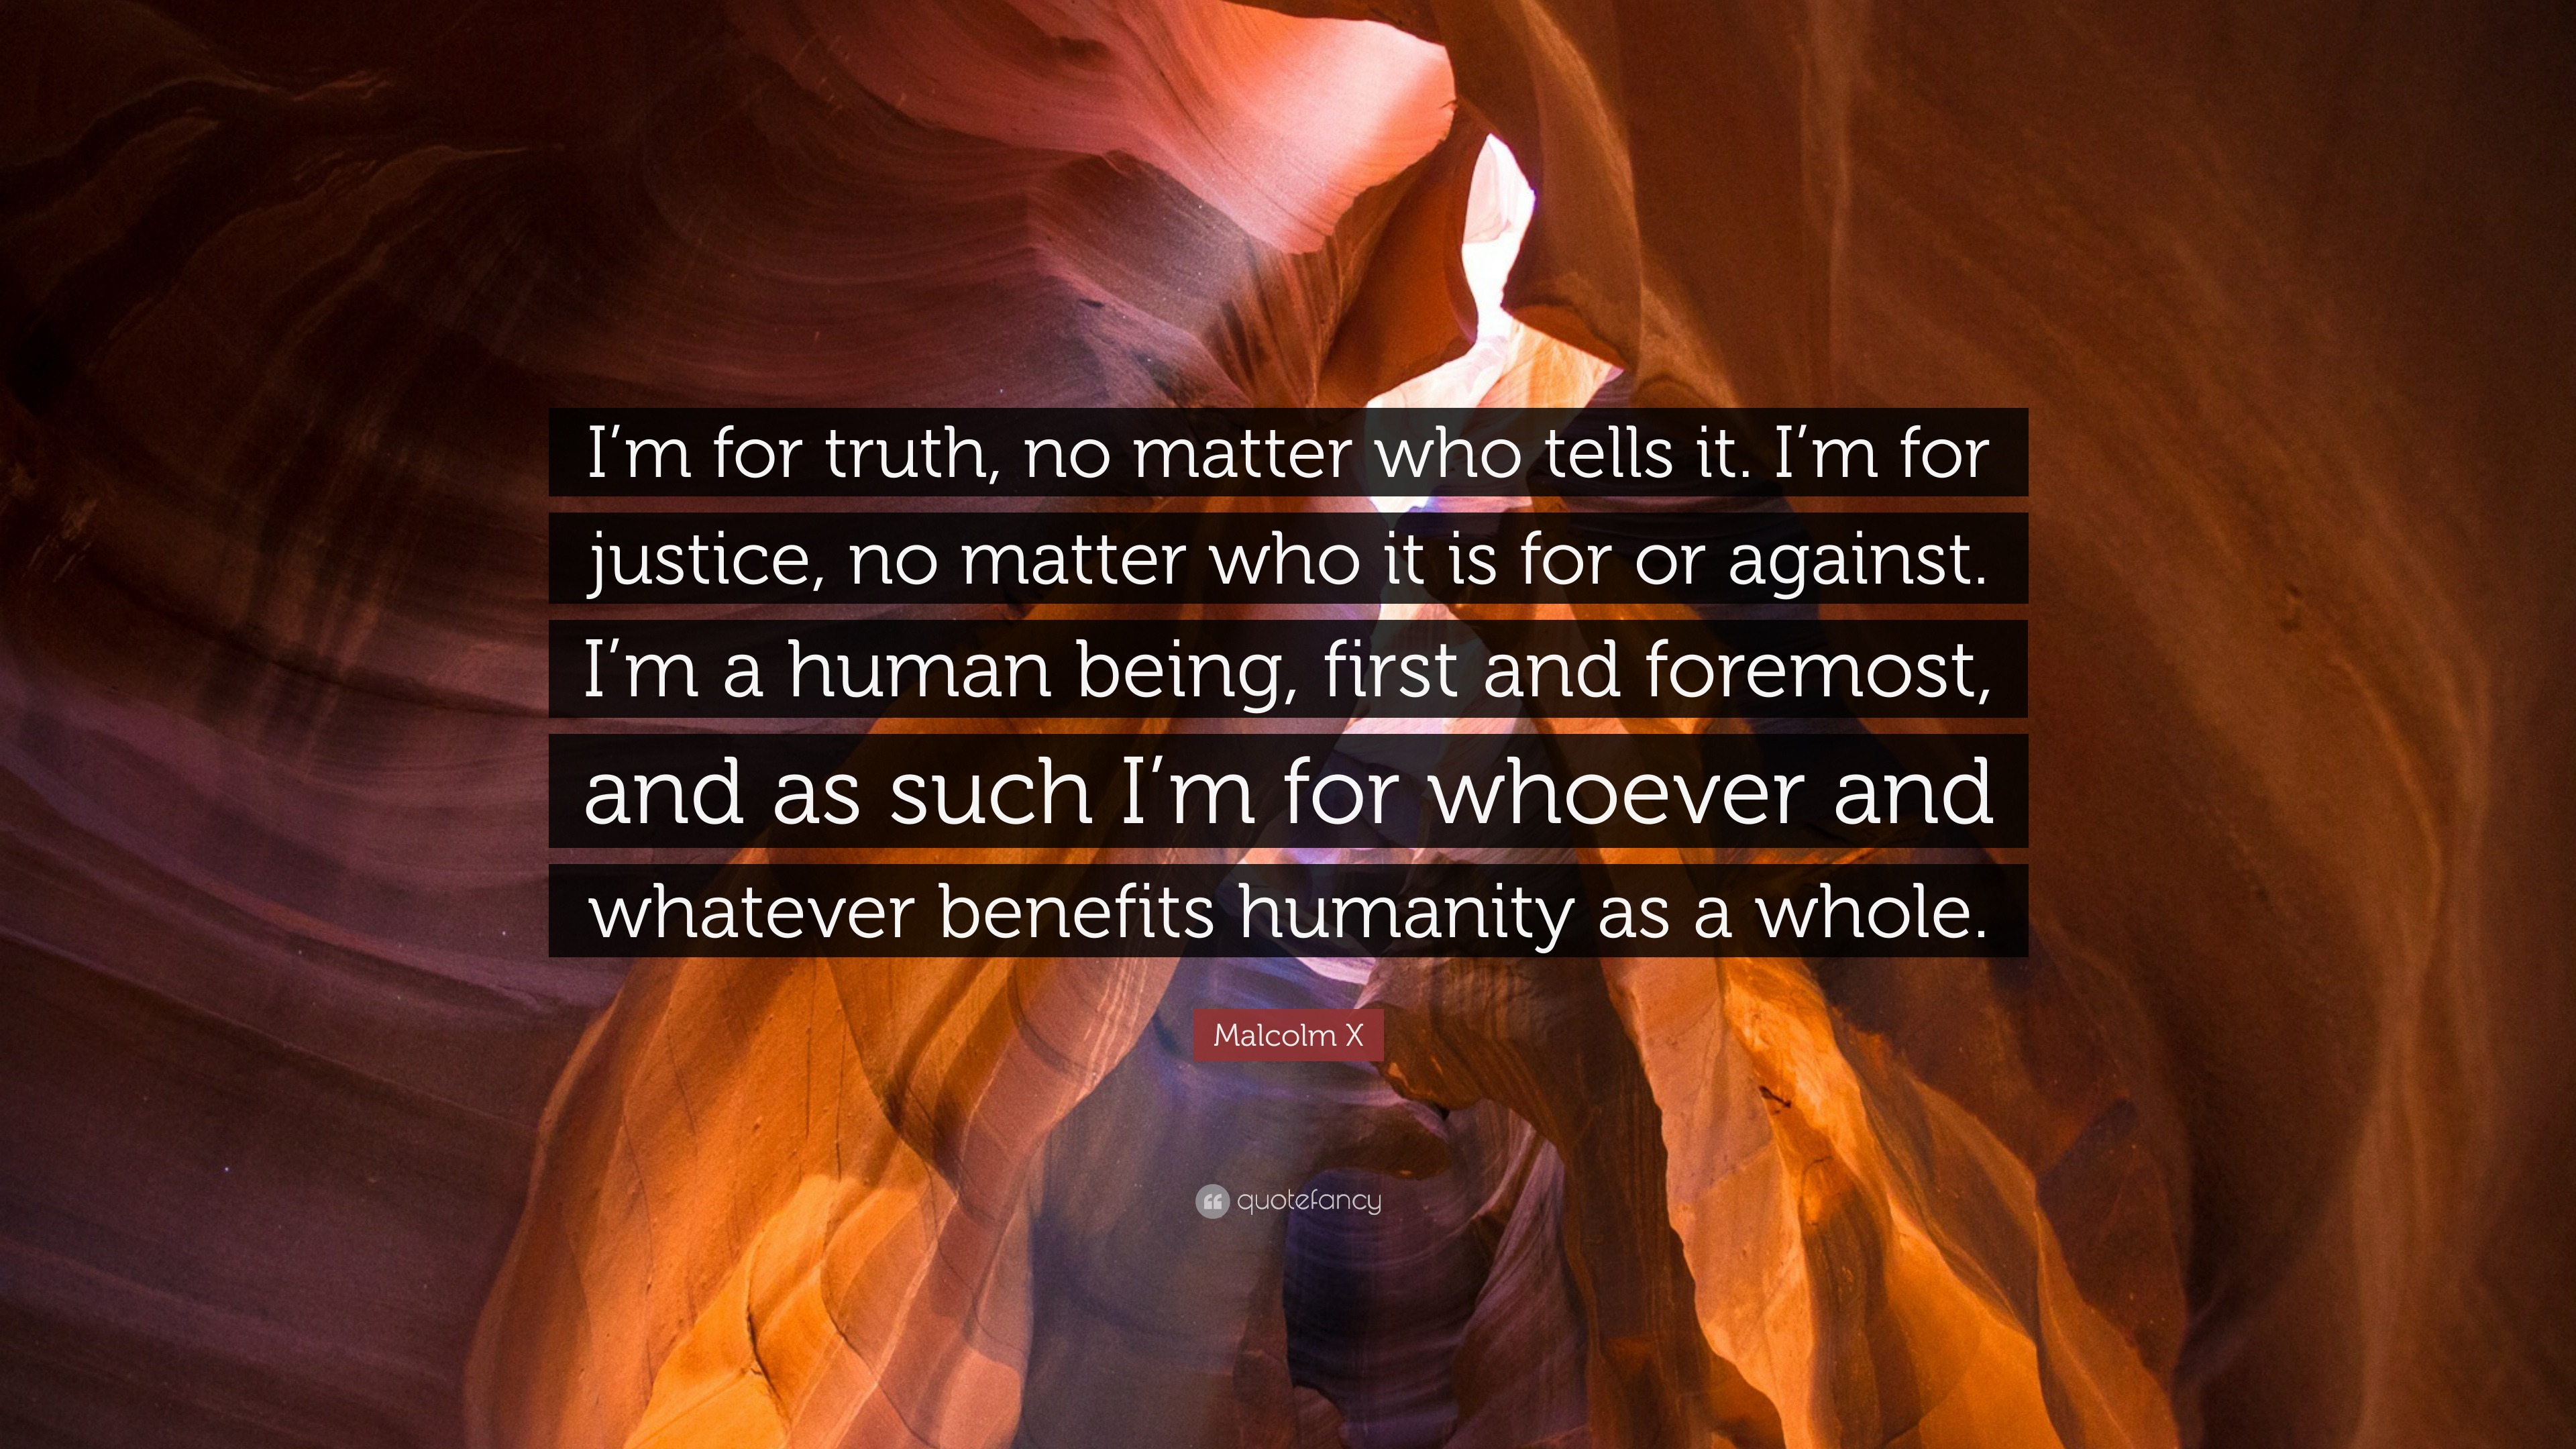 Malcolm X Quote: "I'm for truth, no matter who tells it. I ...